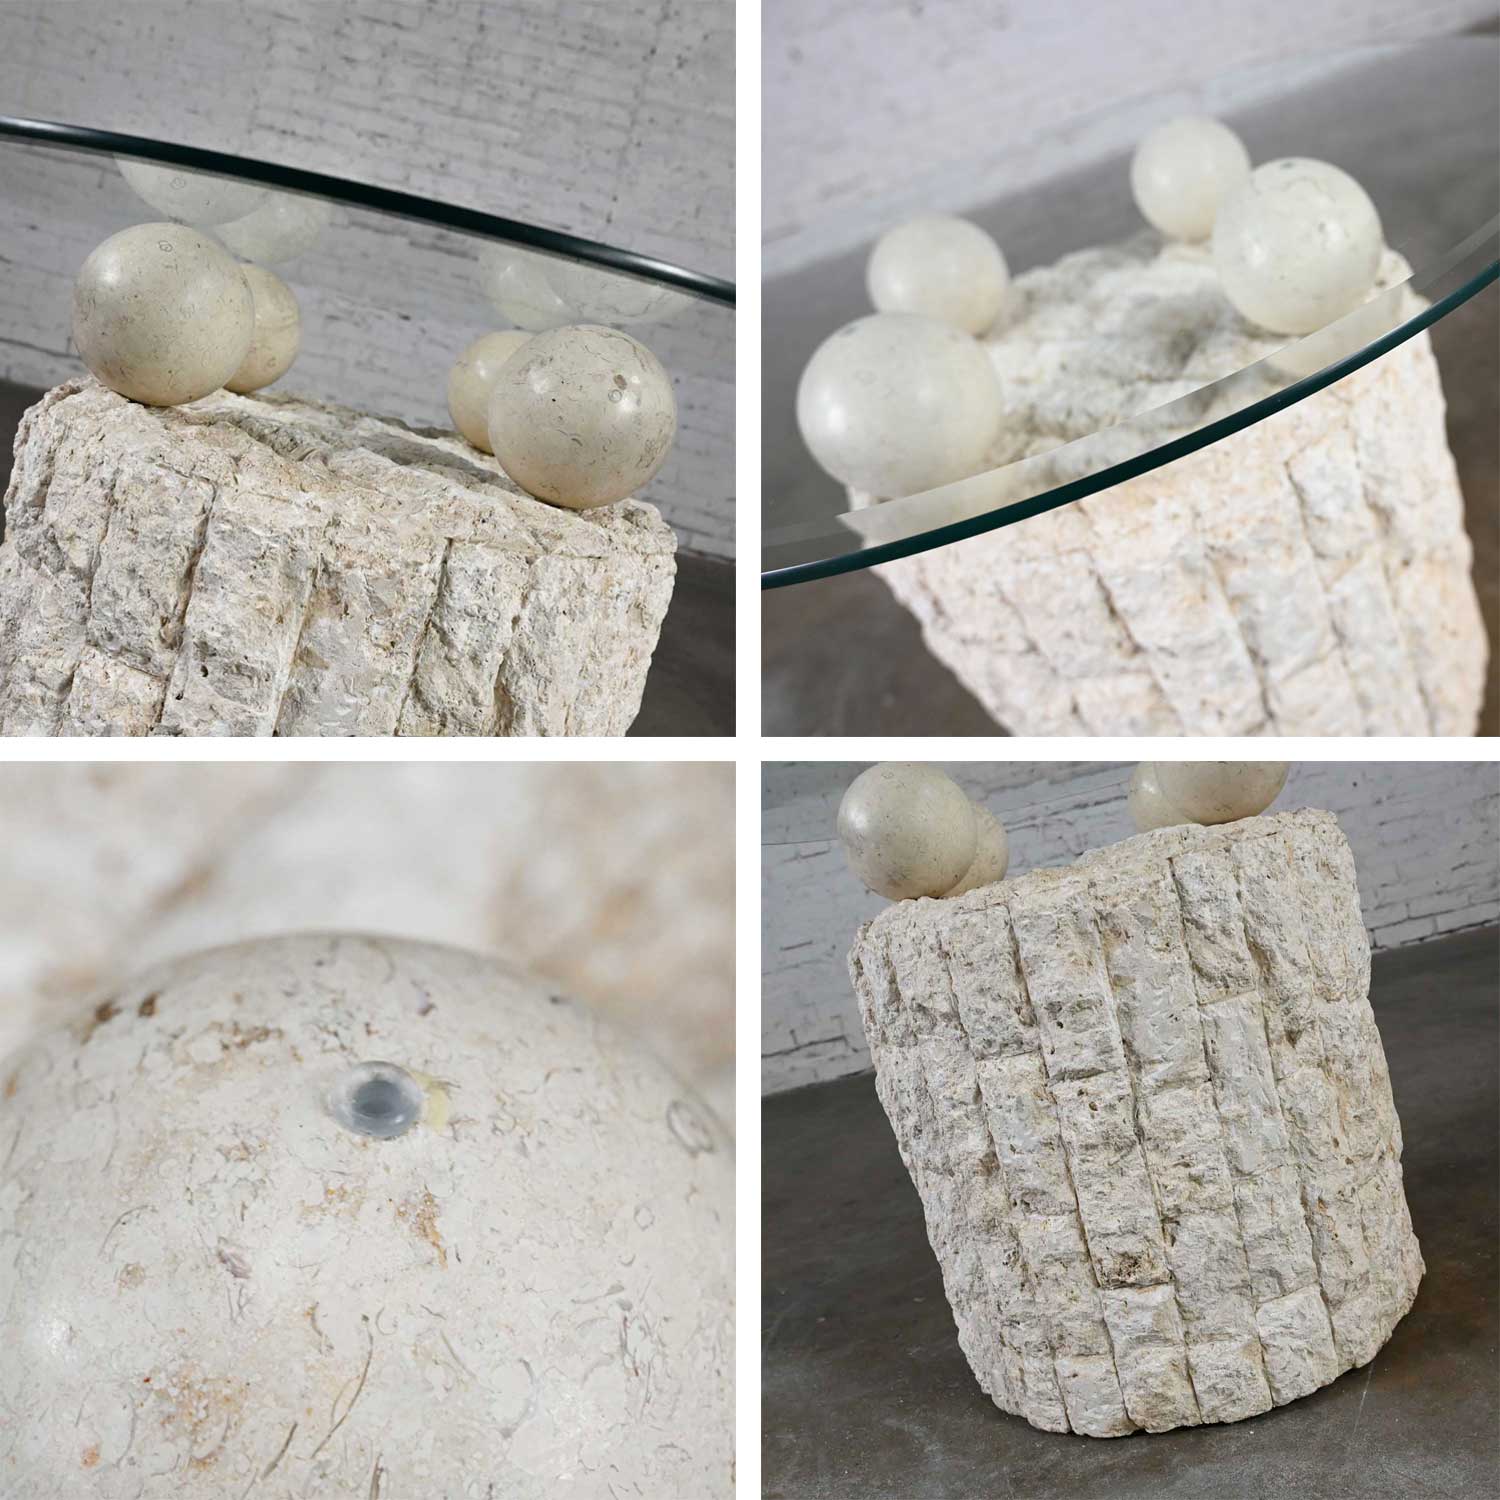 Postmodern Round Tessellated Mactan Stone Base Side Table with 4 Spheres Glass Top Style Maitland Smith